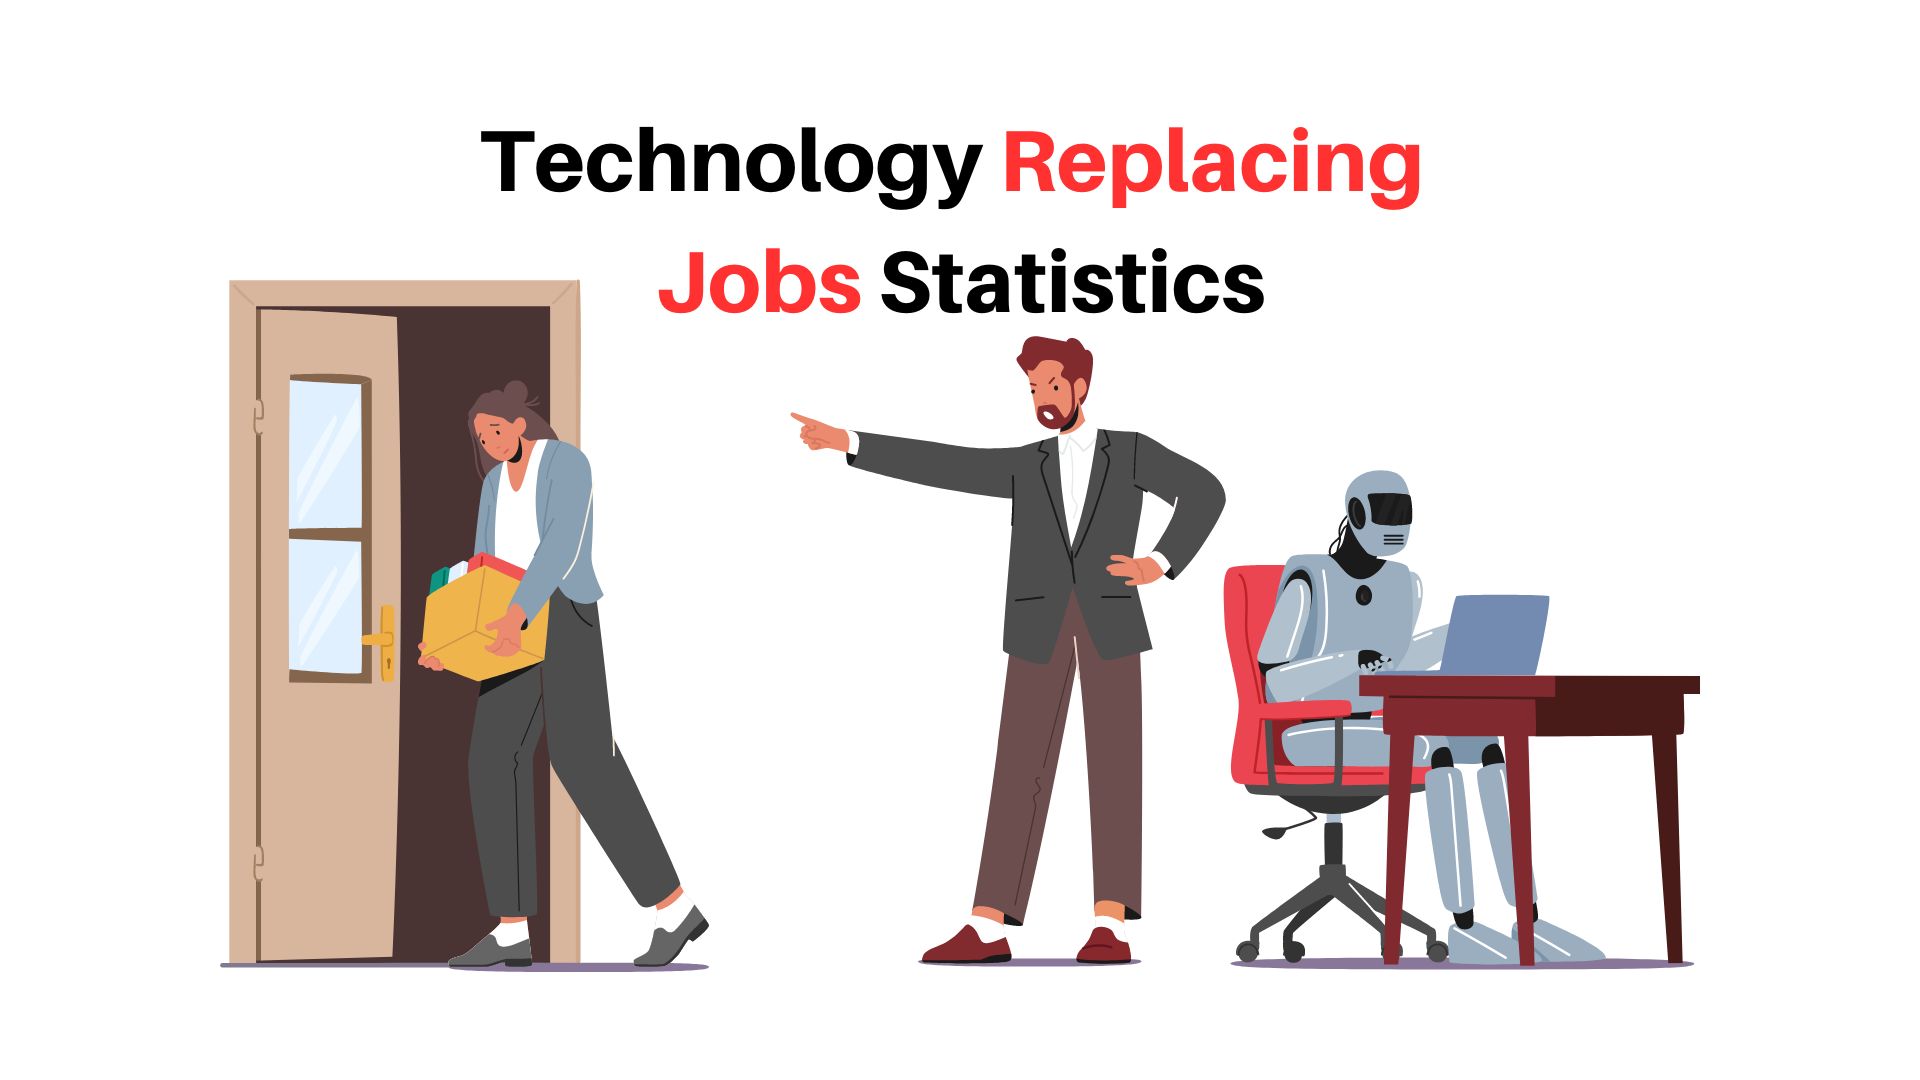 Technology Replacing Jobs Statistics 2024 By Concerns, Attitude, Potential Number of Jobs Lost to Automation and Rate of Adoption by Industry